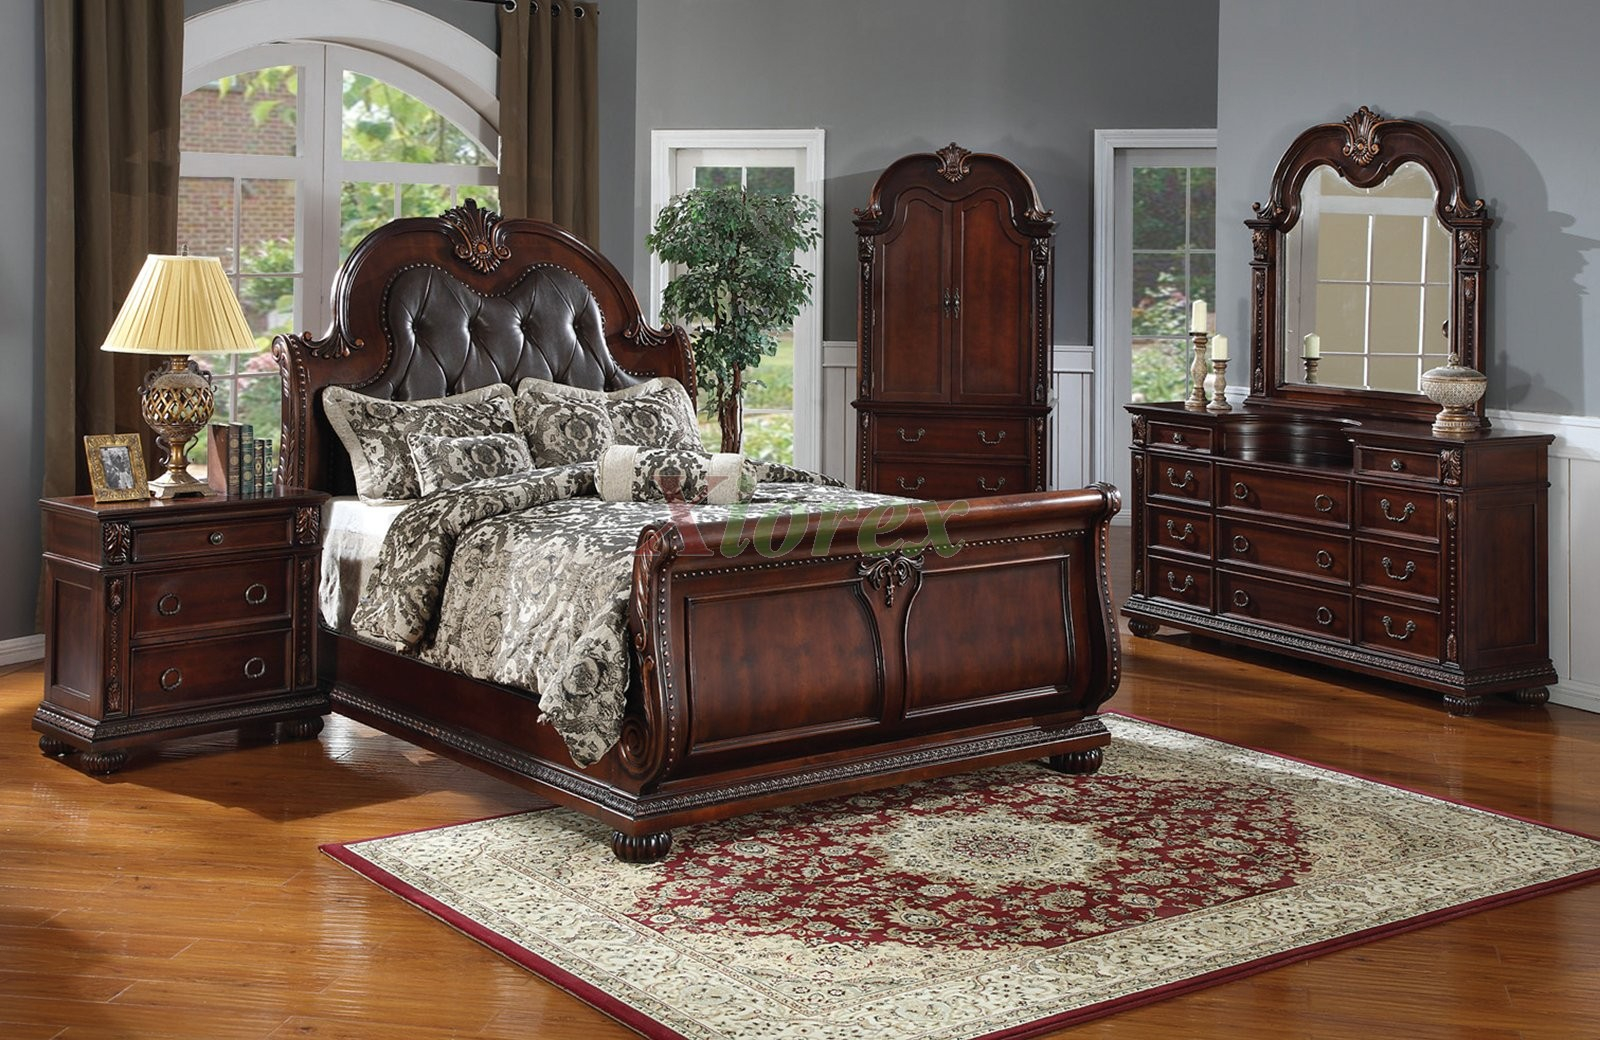 Sleigh Bedroom Furniture Set With Leather Headboard 119 Xiorex in proportions 1600 X 1040